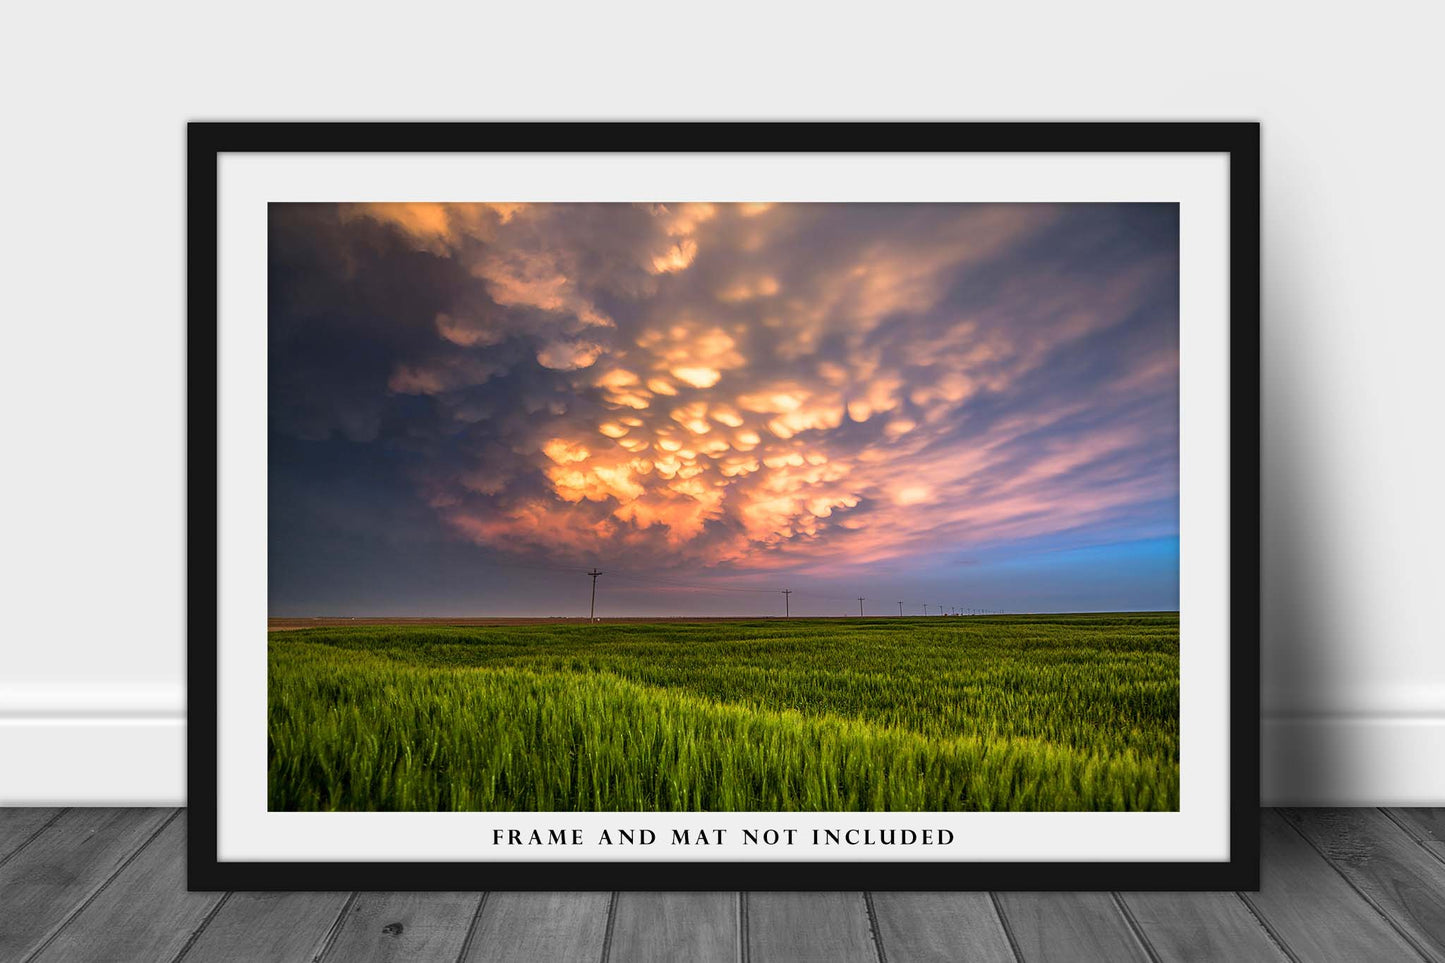 Fine Art Sky Photography Print - Picture of Sunlit Mammatus Clouds Over Fields in Western Kansas Nature Photograph Scenic Home Decor